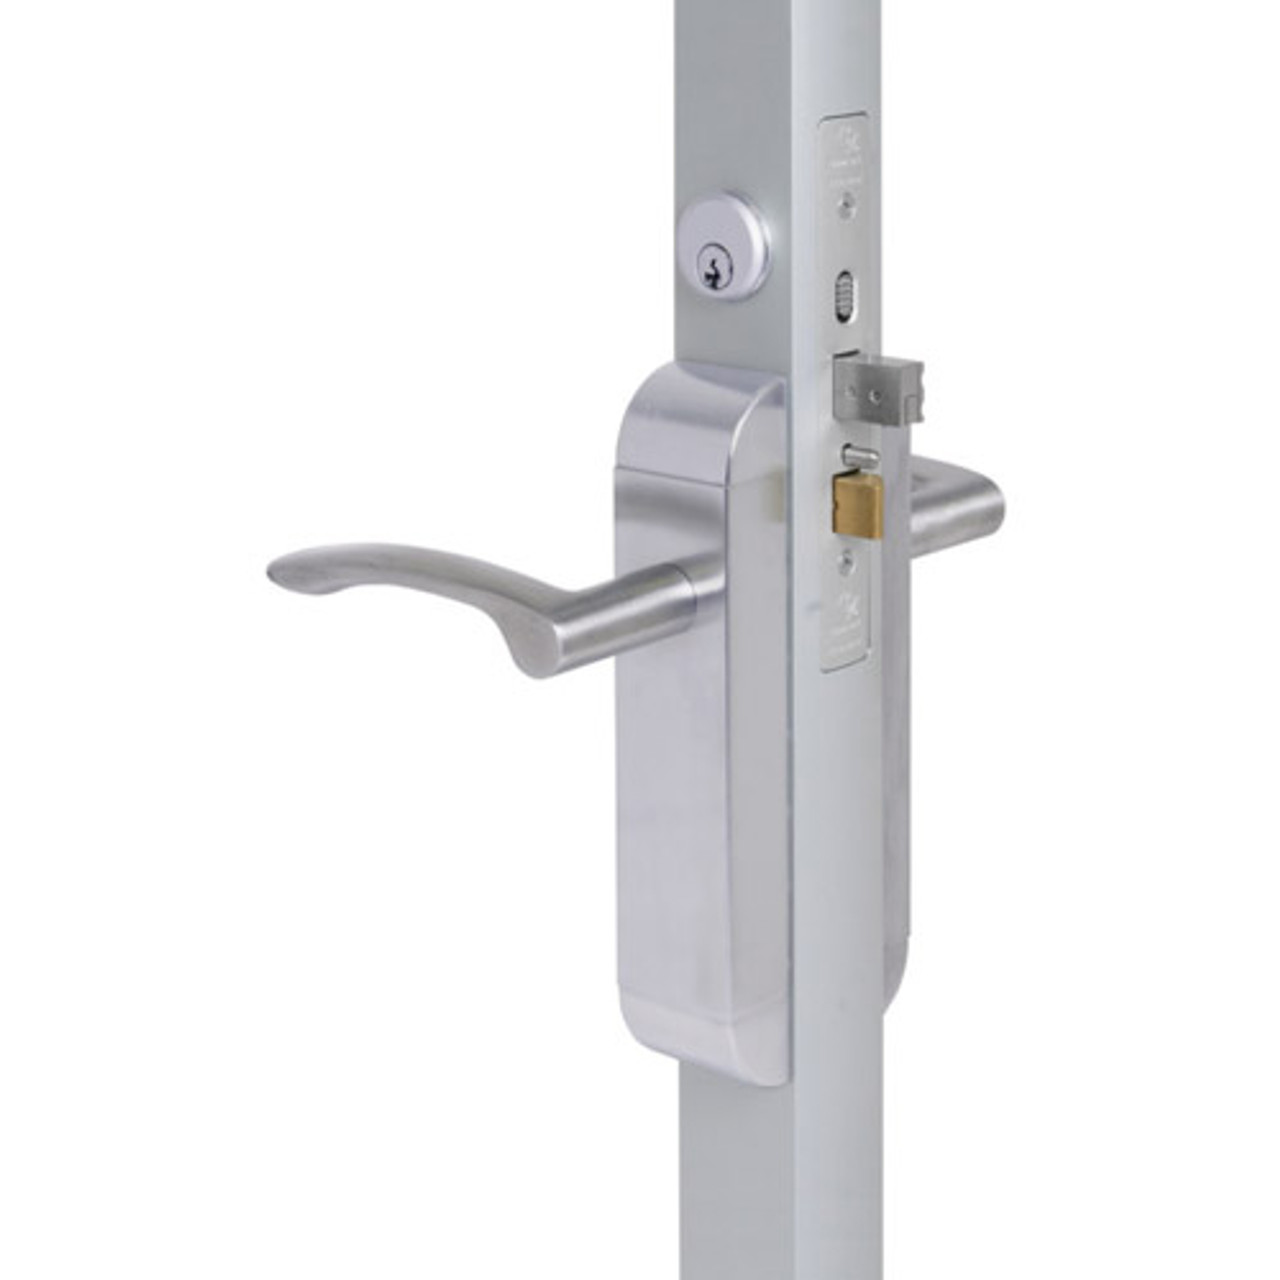 2190-441-102-32 Adams Rite Dual Force Interconnected 2190 series Deadlock/Deadlatch in Bright Stainless